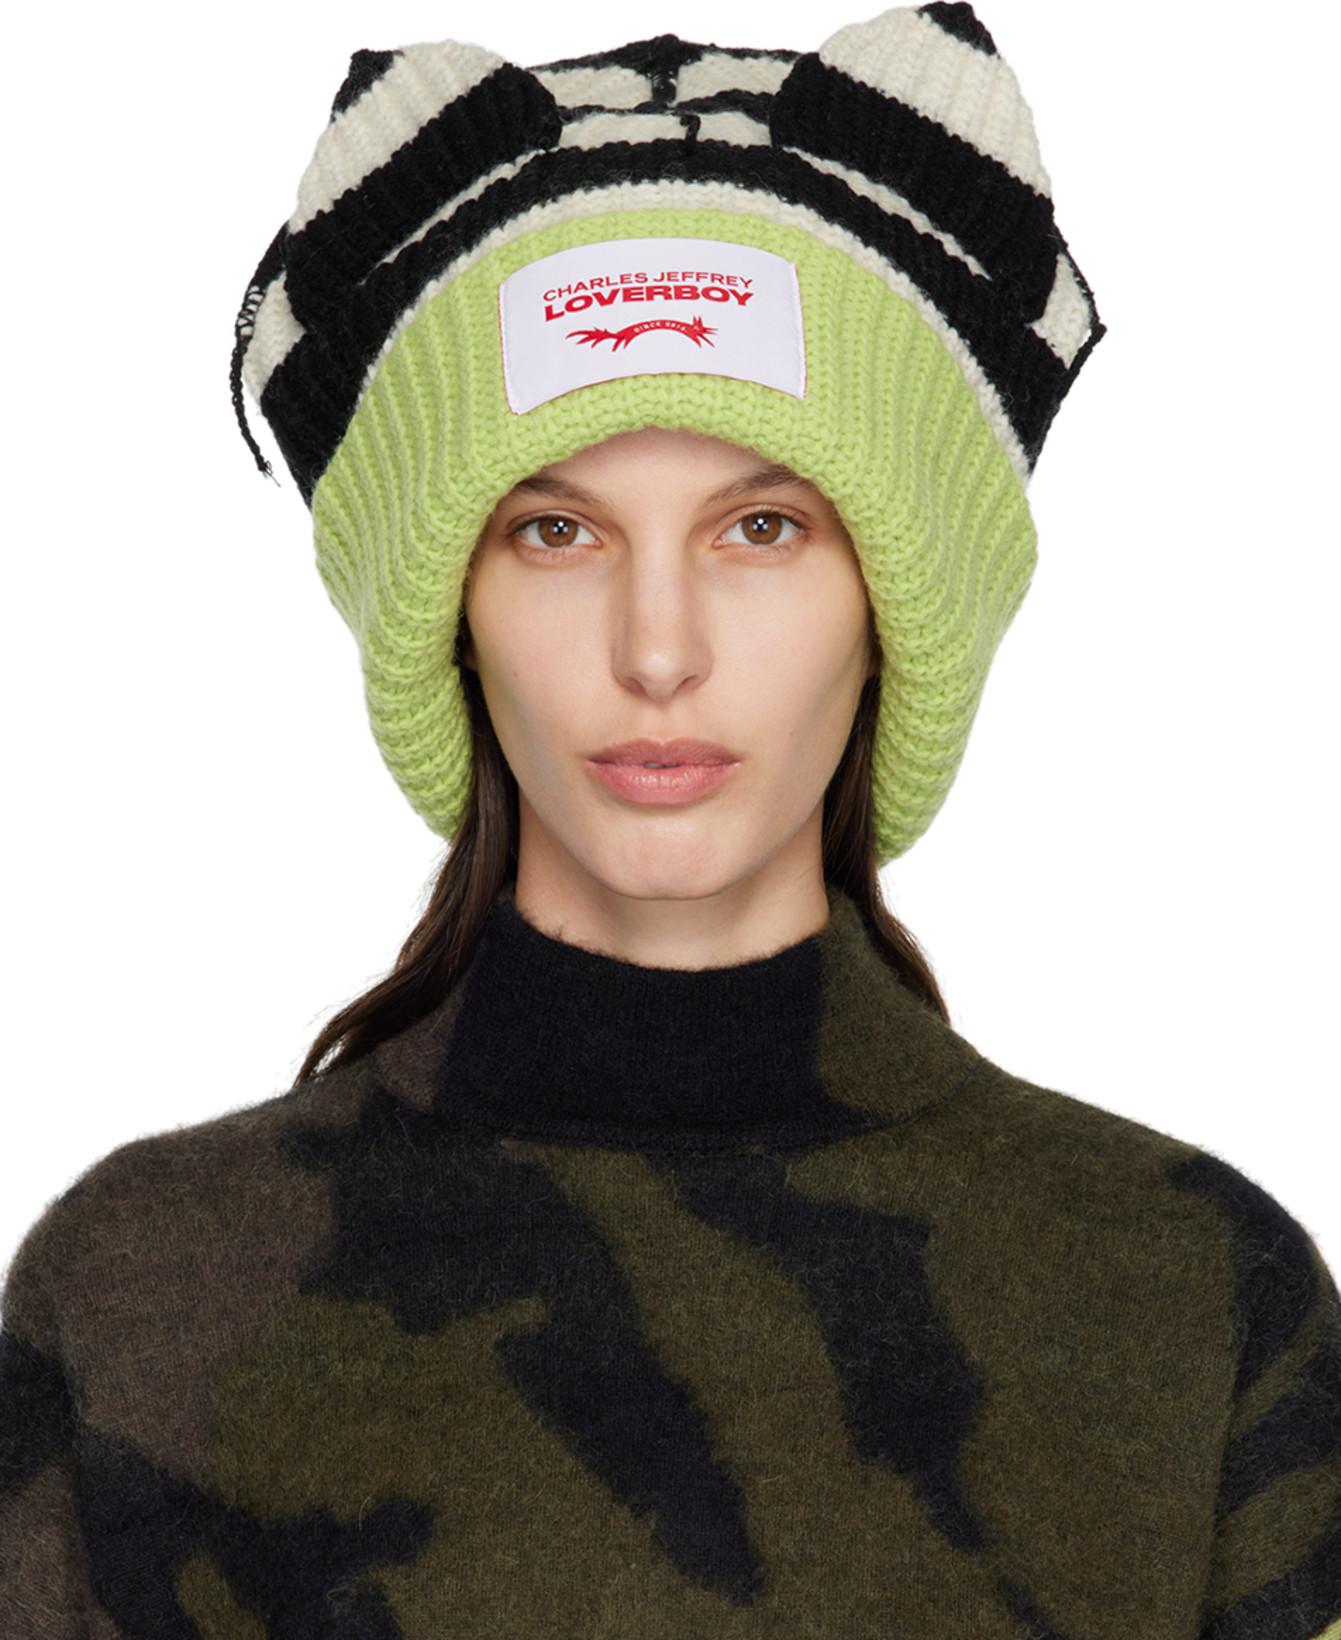 SSENSE Exclusive Black Supersized Chunky Ears Beanie by CHARLES JEFFREY LOVERBOY